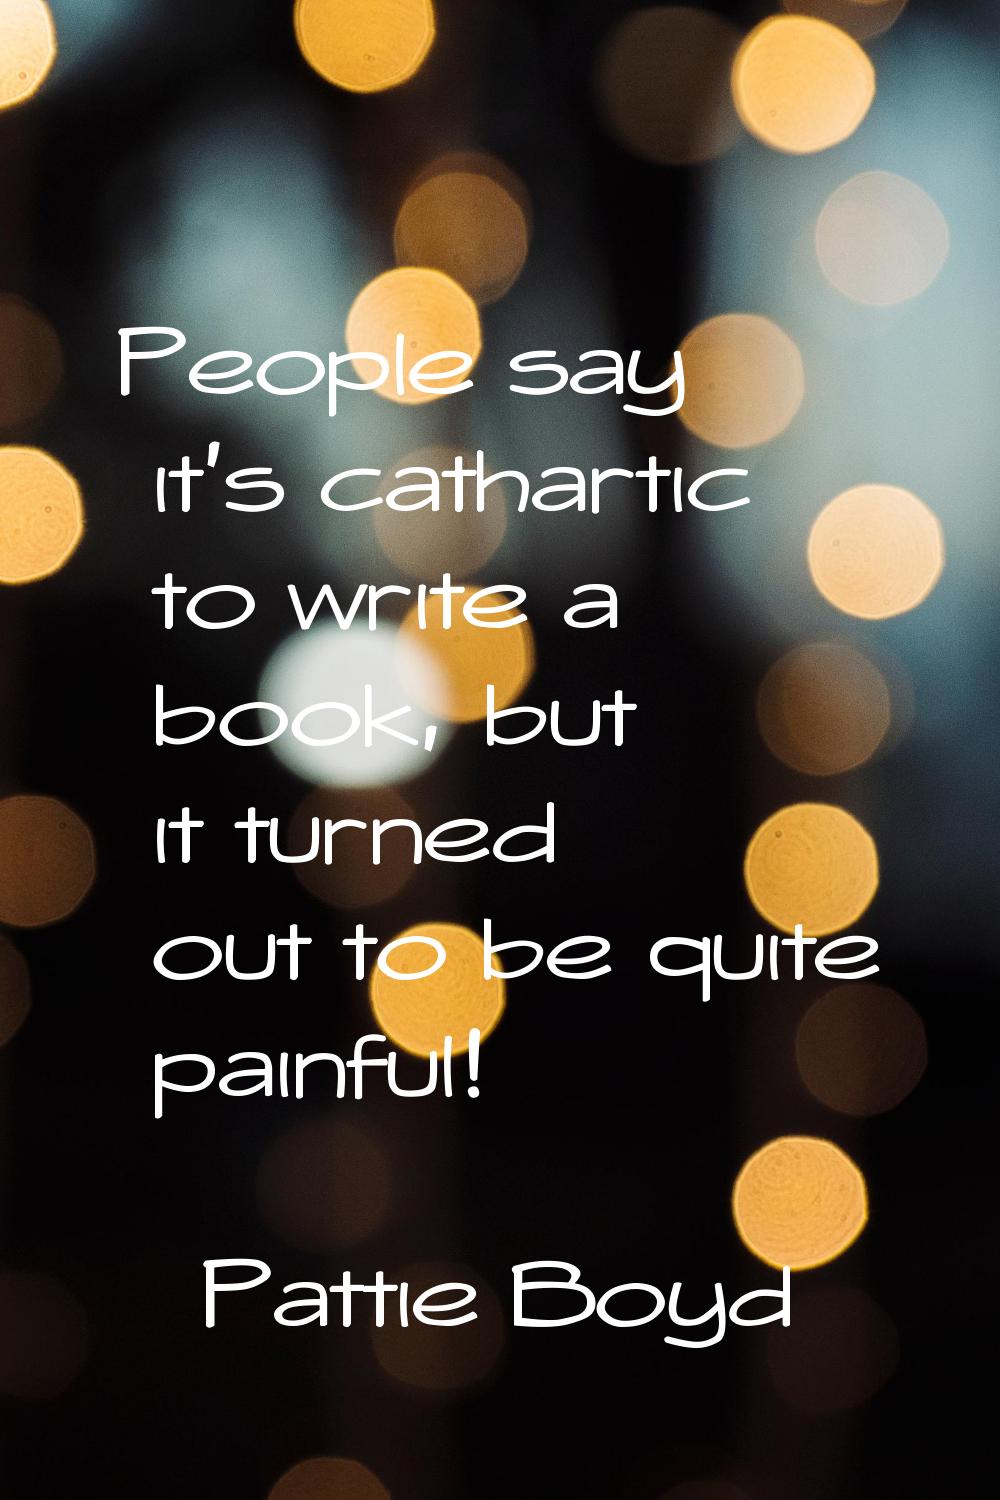 People say it's cathartic to write a book, but it turned out to be quite painful!